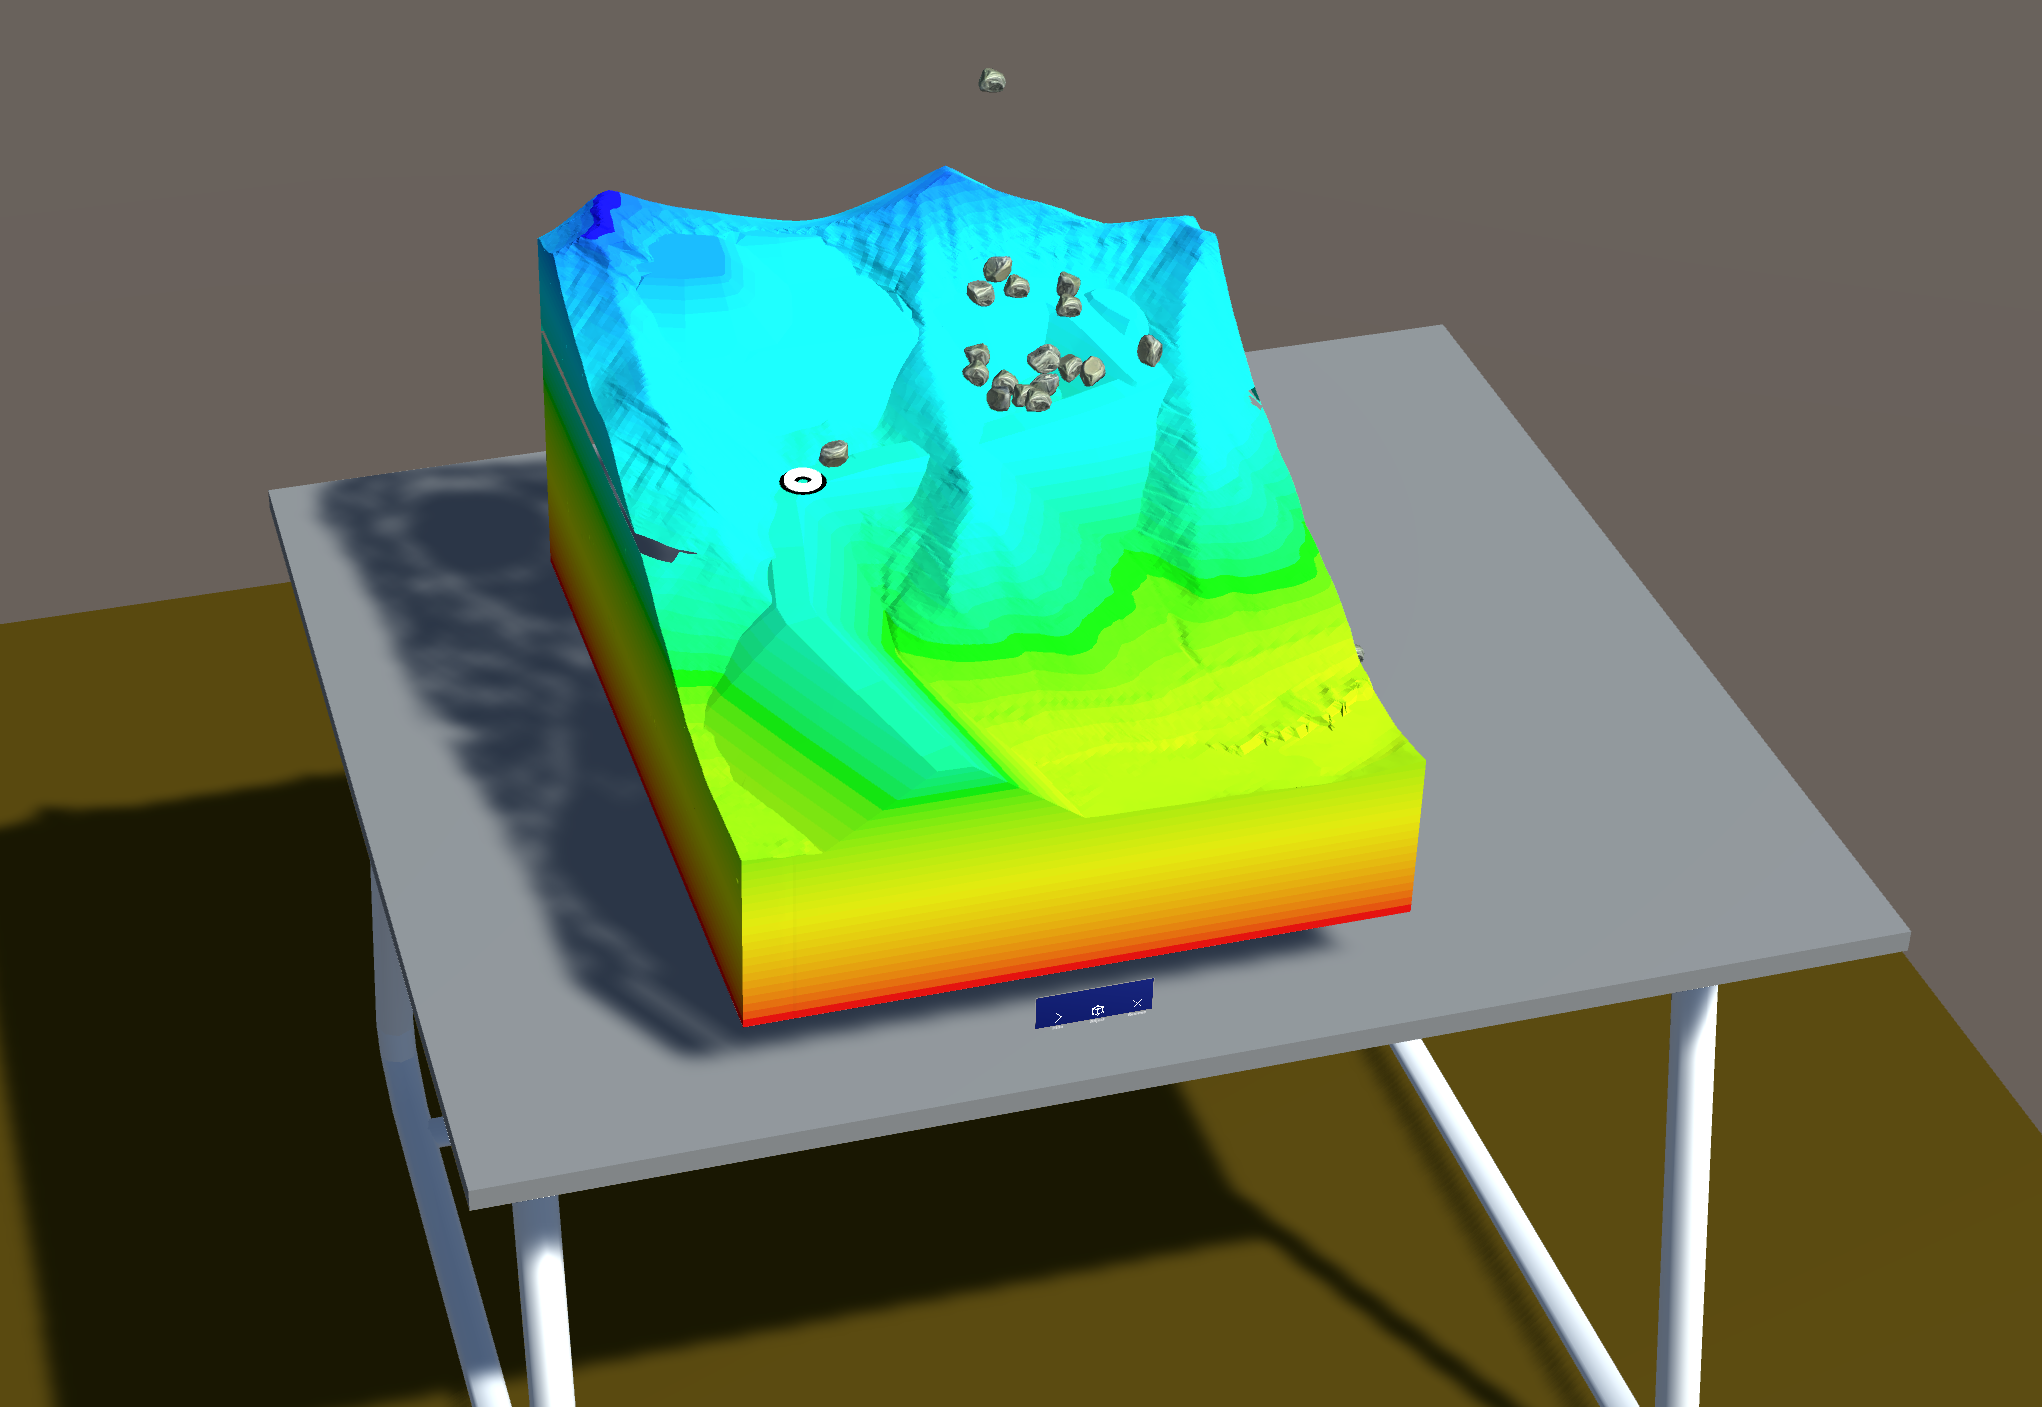 This model shows off the clean rendering of geographic data from a pit construction project.